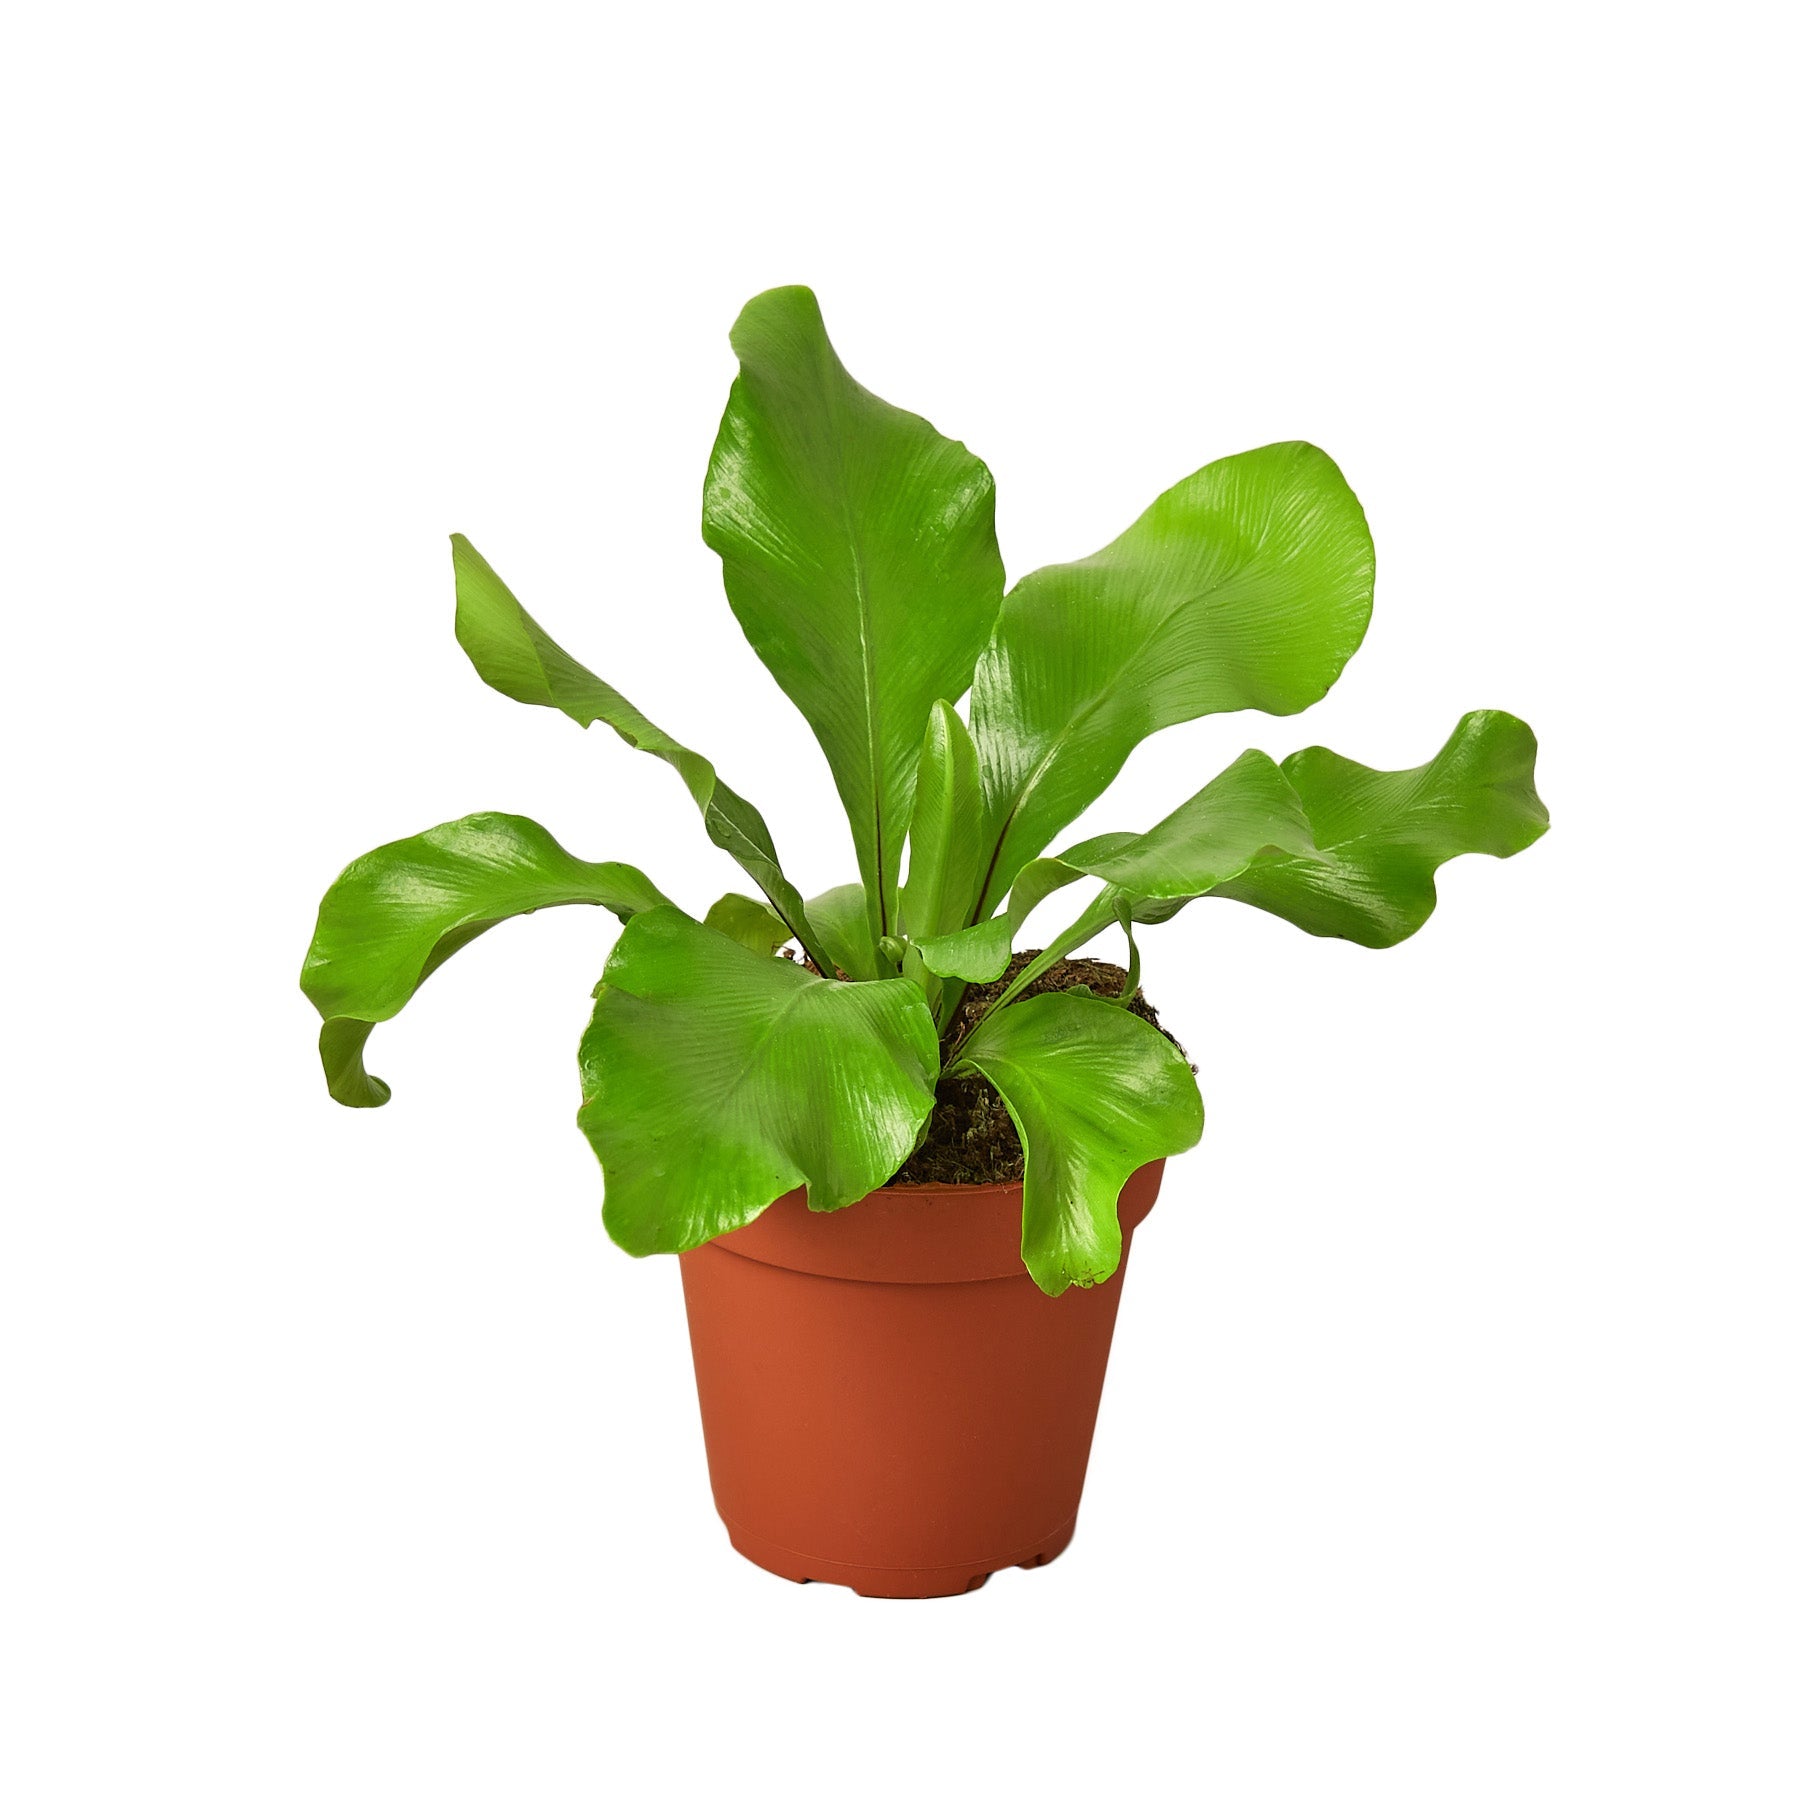 A green plant in a pot on a white background at one of the top plant nurseries near me.